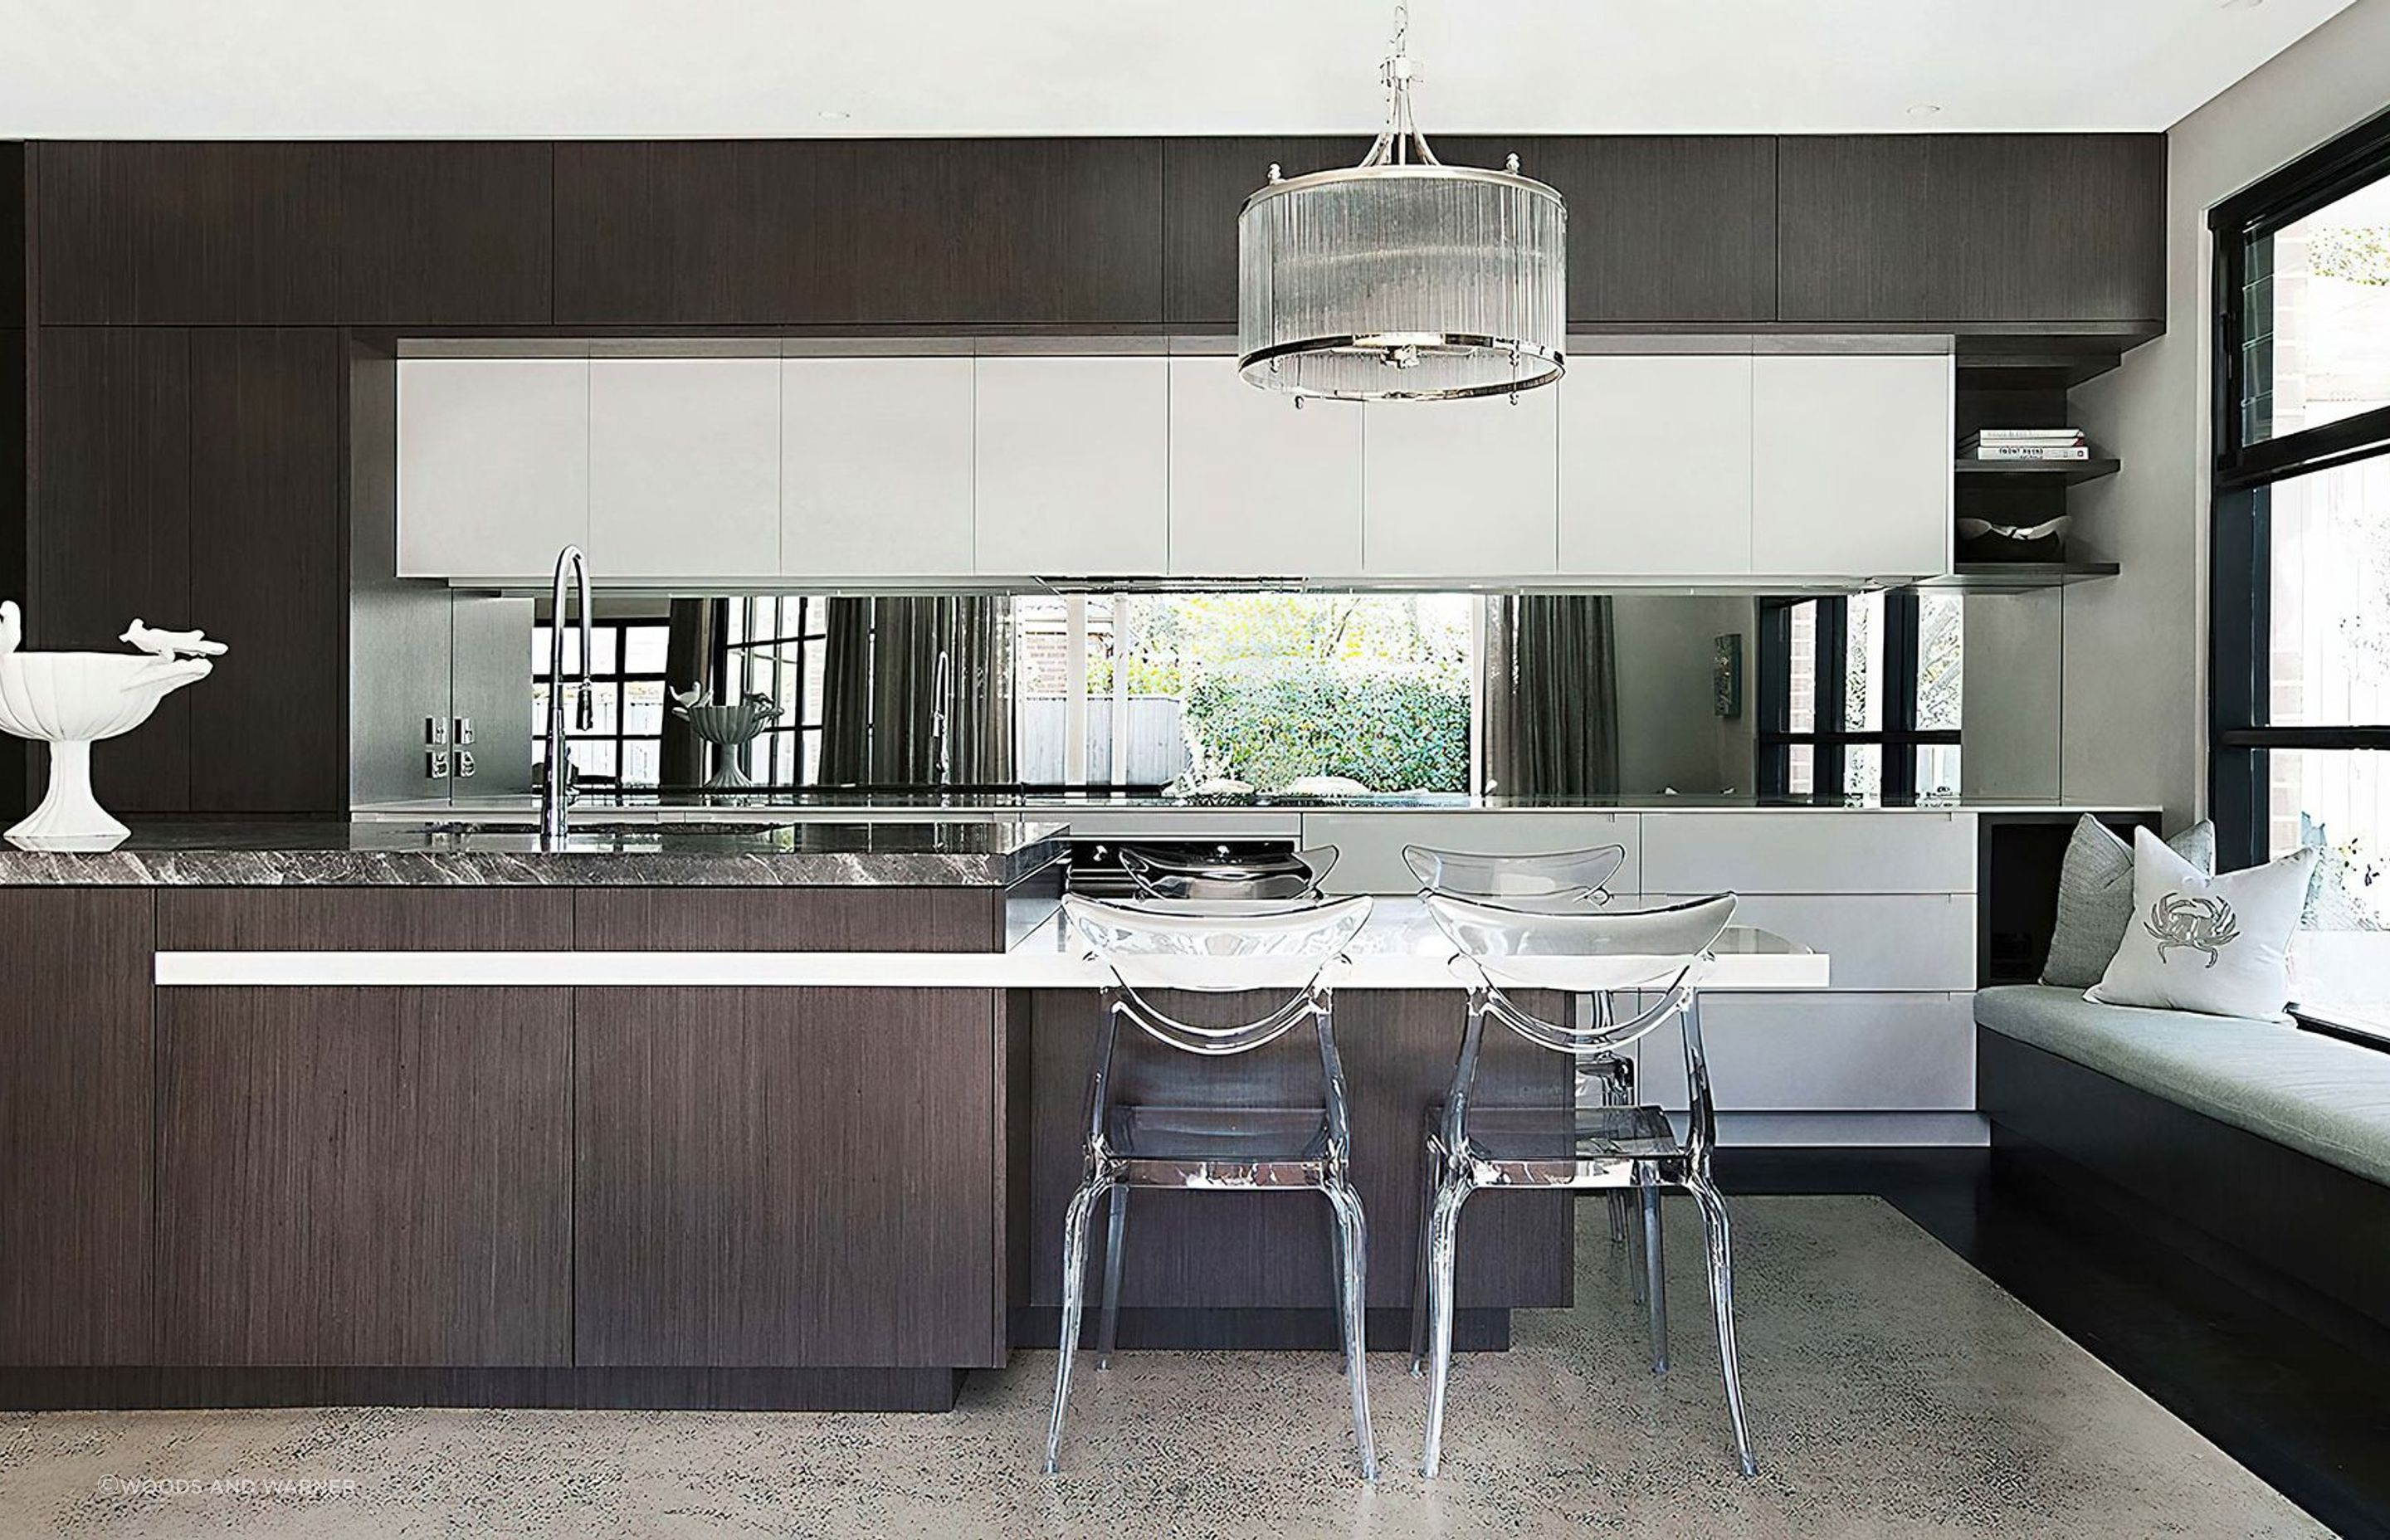 Glass kitchen lighting adds an elegant touch to a modern kitchen.